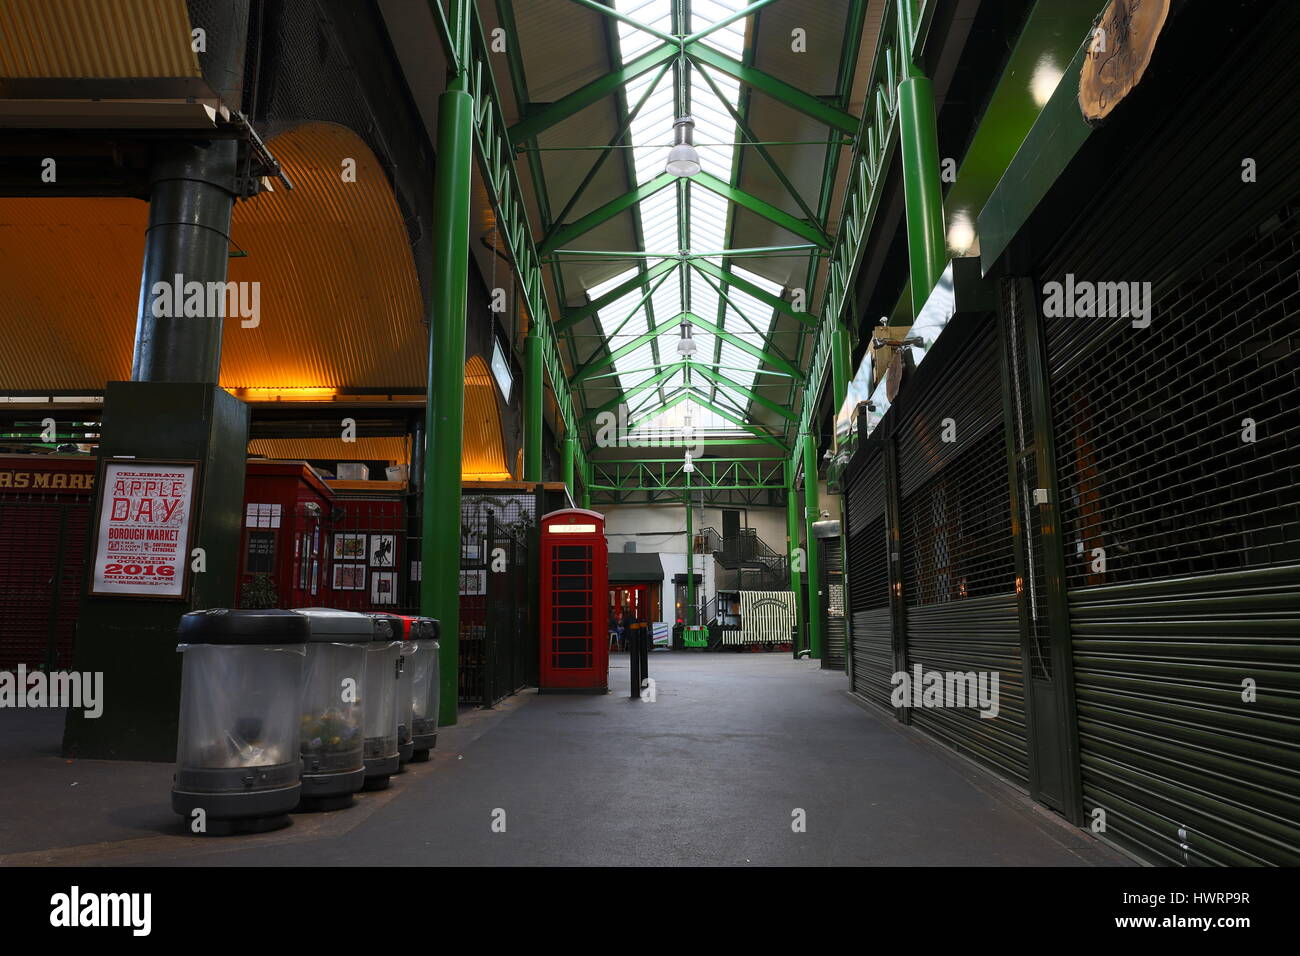 London Borough Market With No People And Stalls Closed During Day Stock Photo